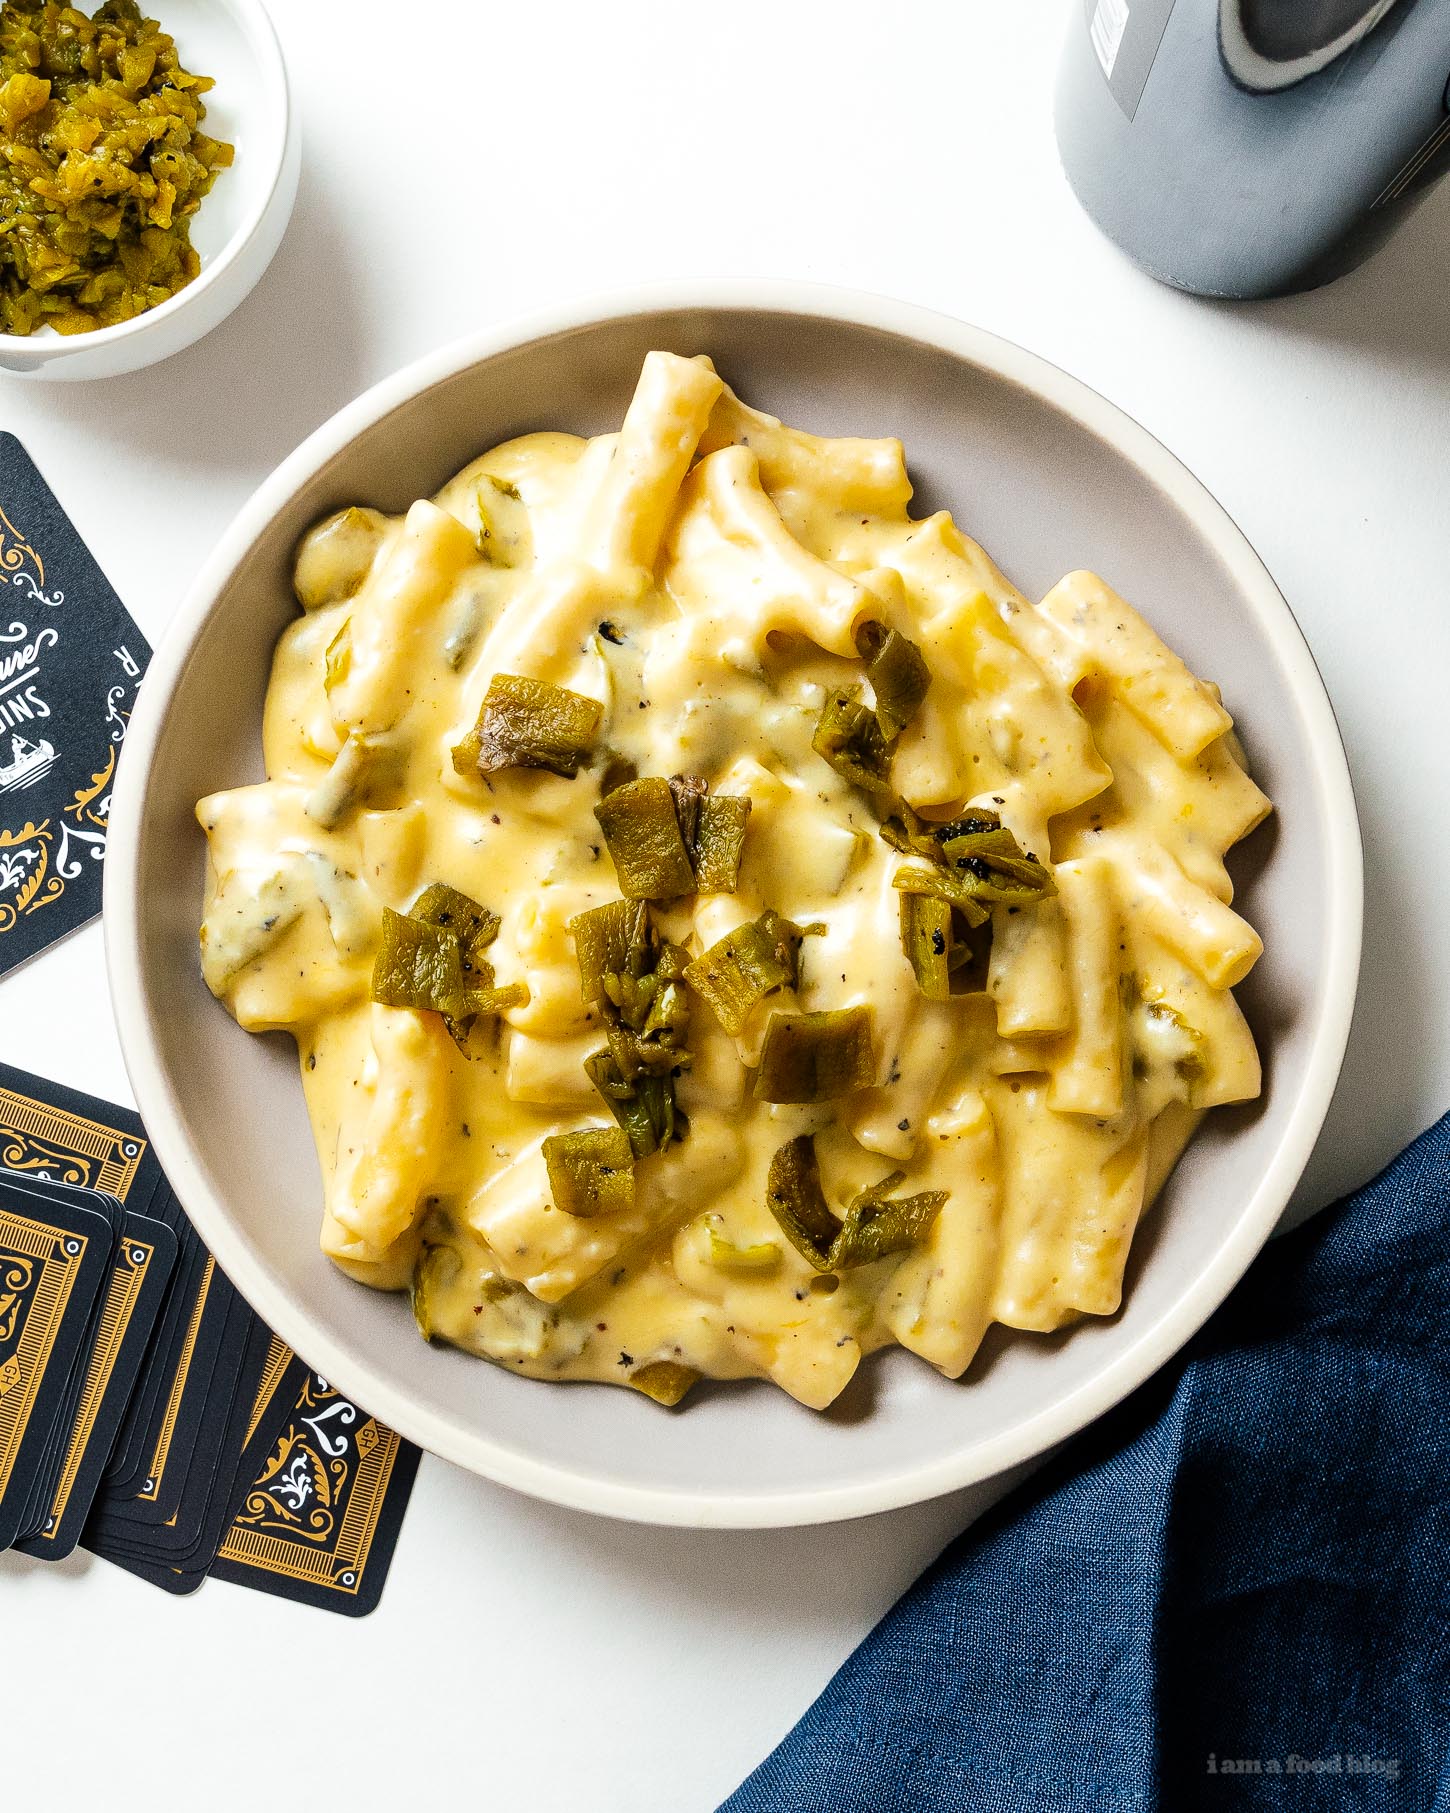 Creamy, spicy, comforting hatch green chile mac and cheese. Perfect for warming you up the coming fall days. #macandcheese #dinner #dinnerrecipes #cheese #comfort #comfortfood #hatchchile #greenchile